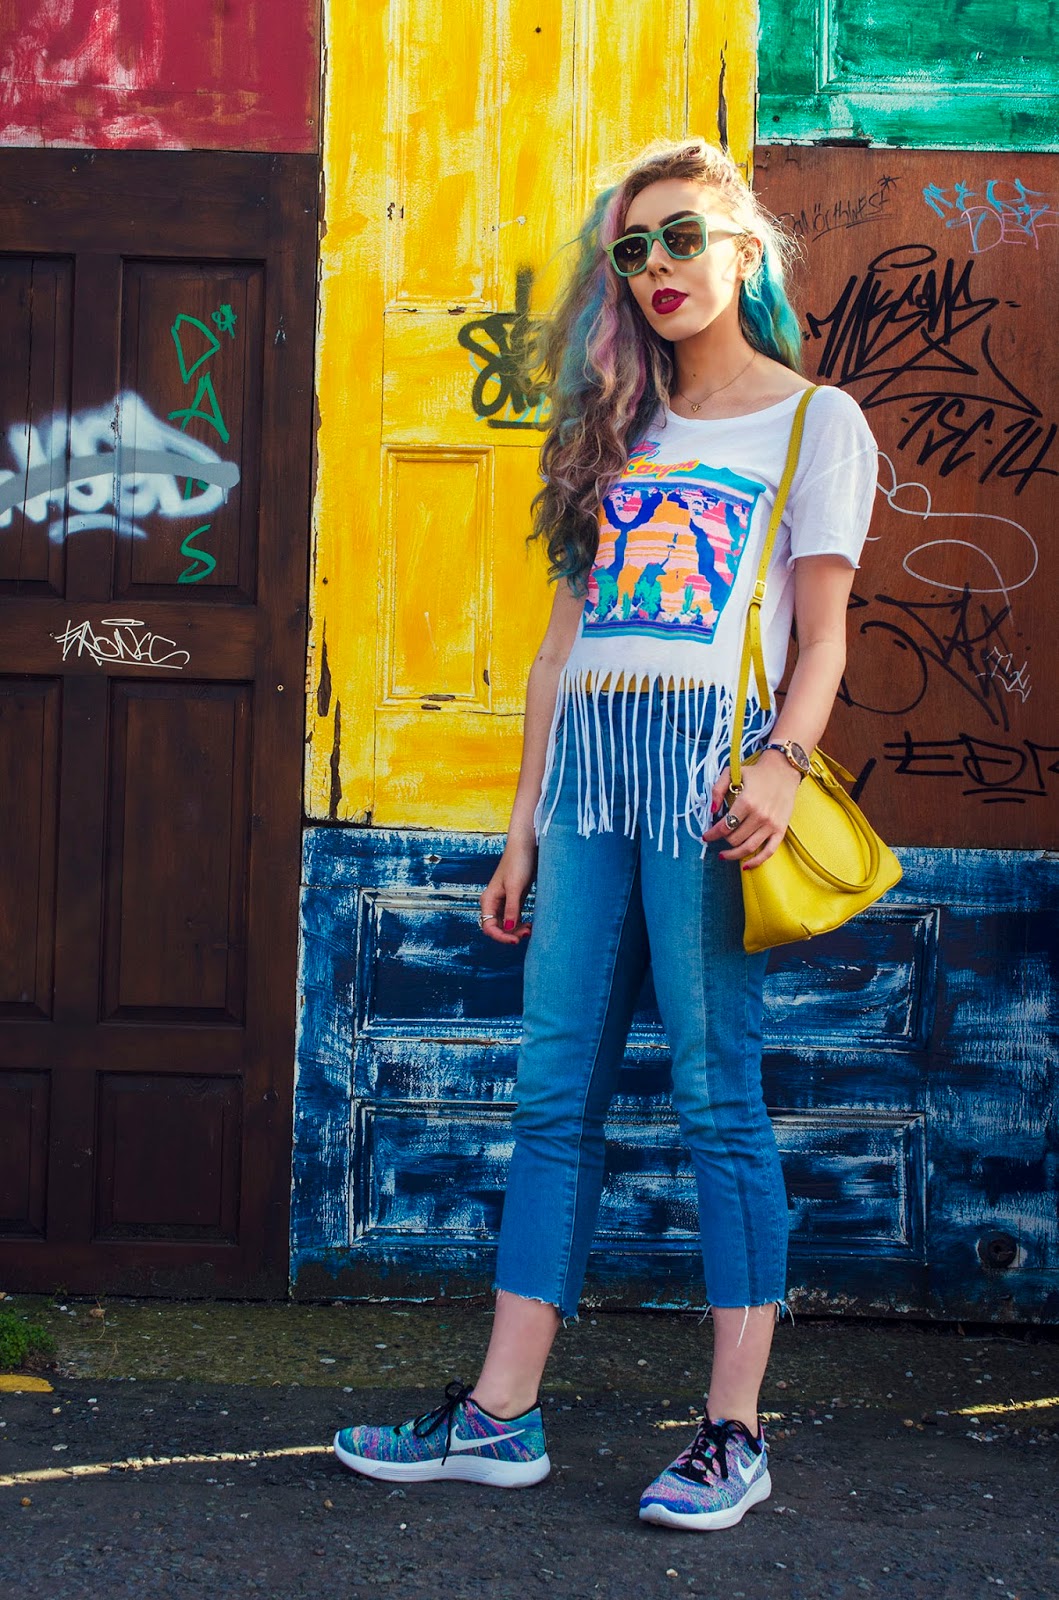 Wildfox Top ripped jeans nike trainers rainbow hair lookbook blogger